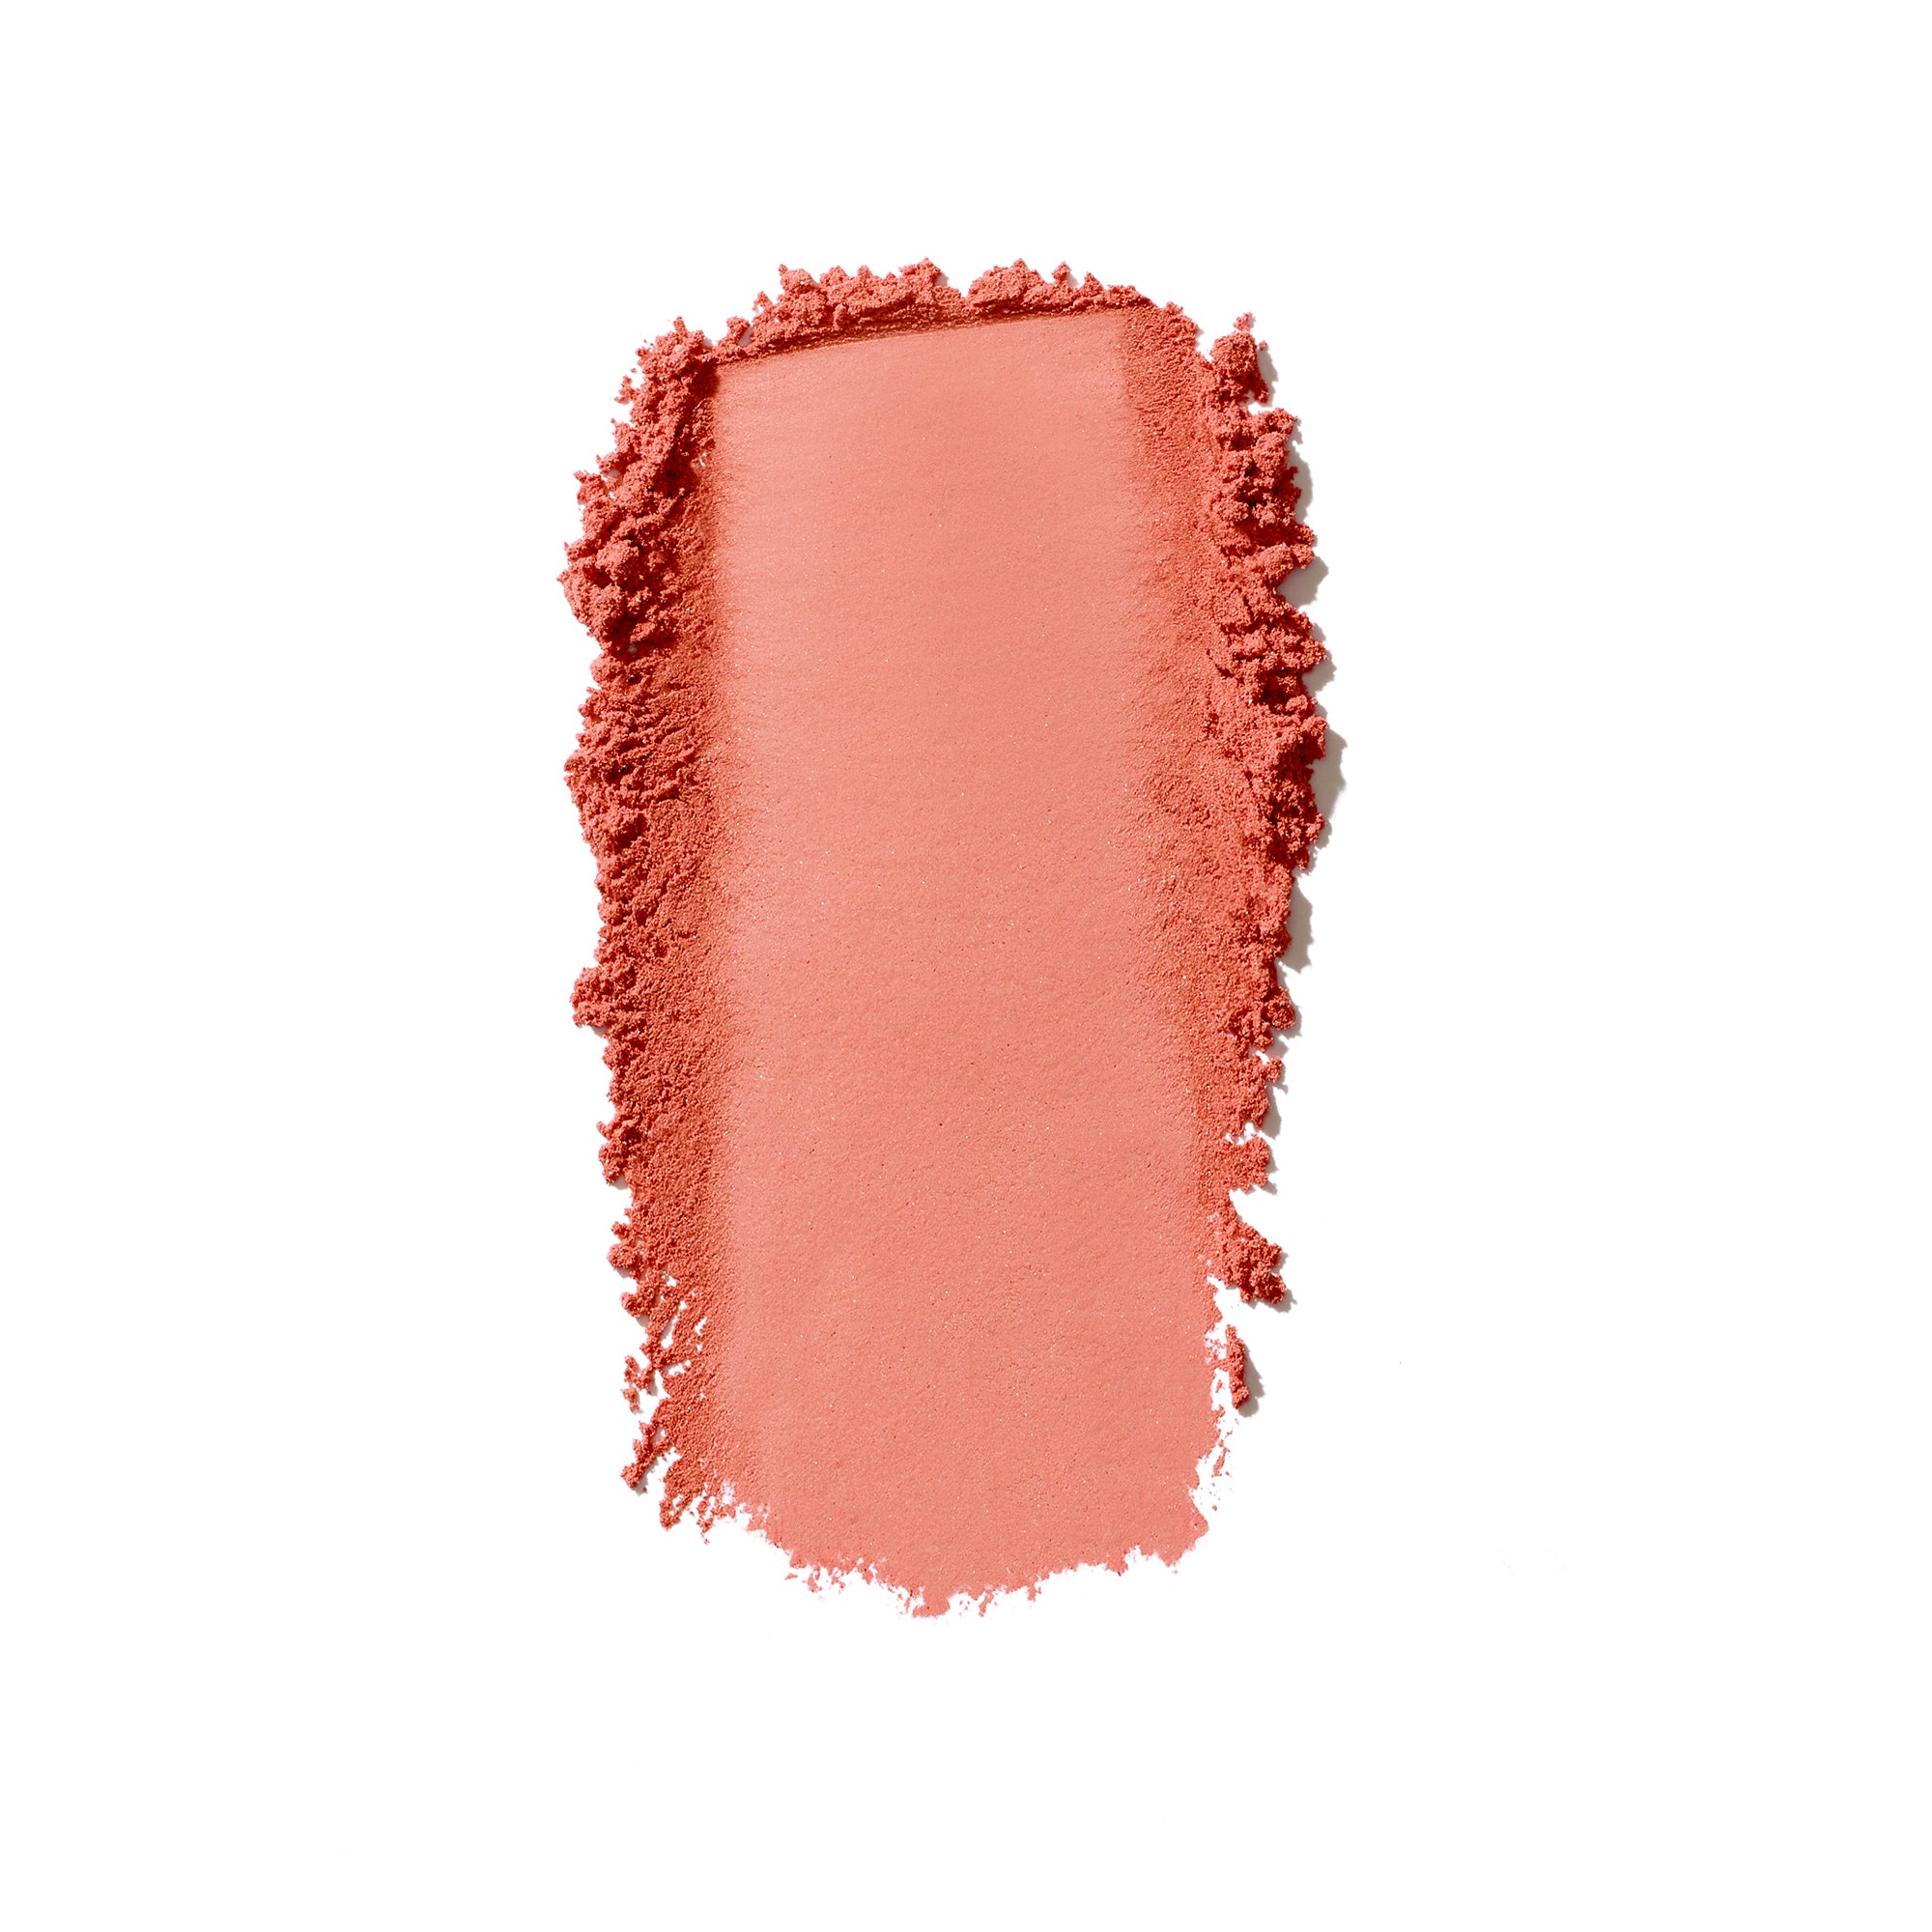 Jane Iredale PurePressed Blush - Limited Edition 30th Anniversary Collection / Velvet Petal